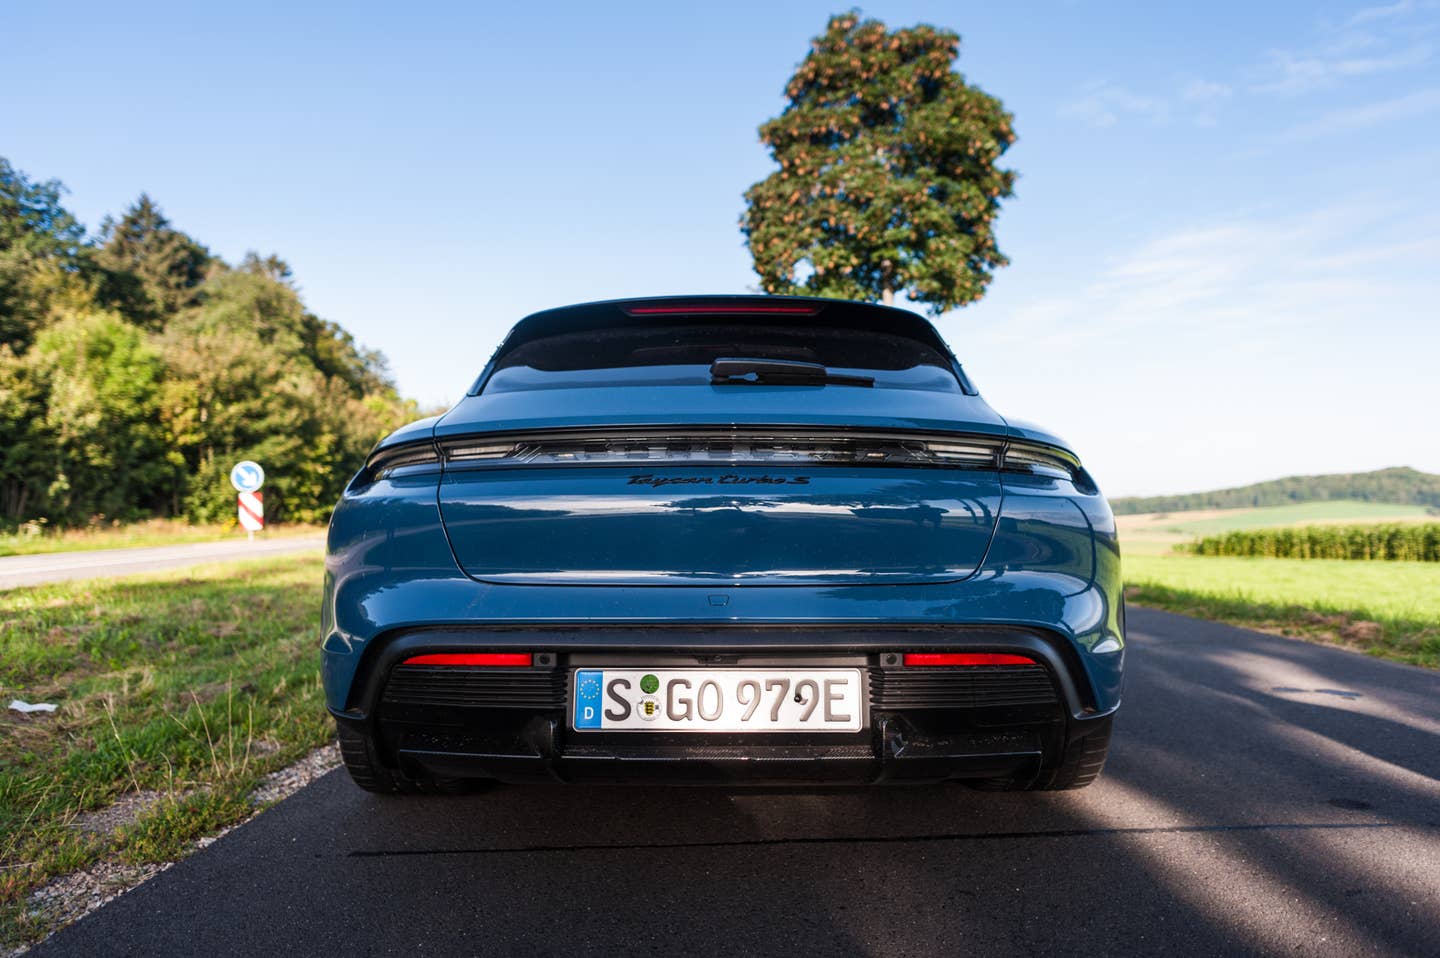 2021 Porsche Taycan Turbo S Cross Turismo Review: The Autobahn Queen of the  Future